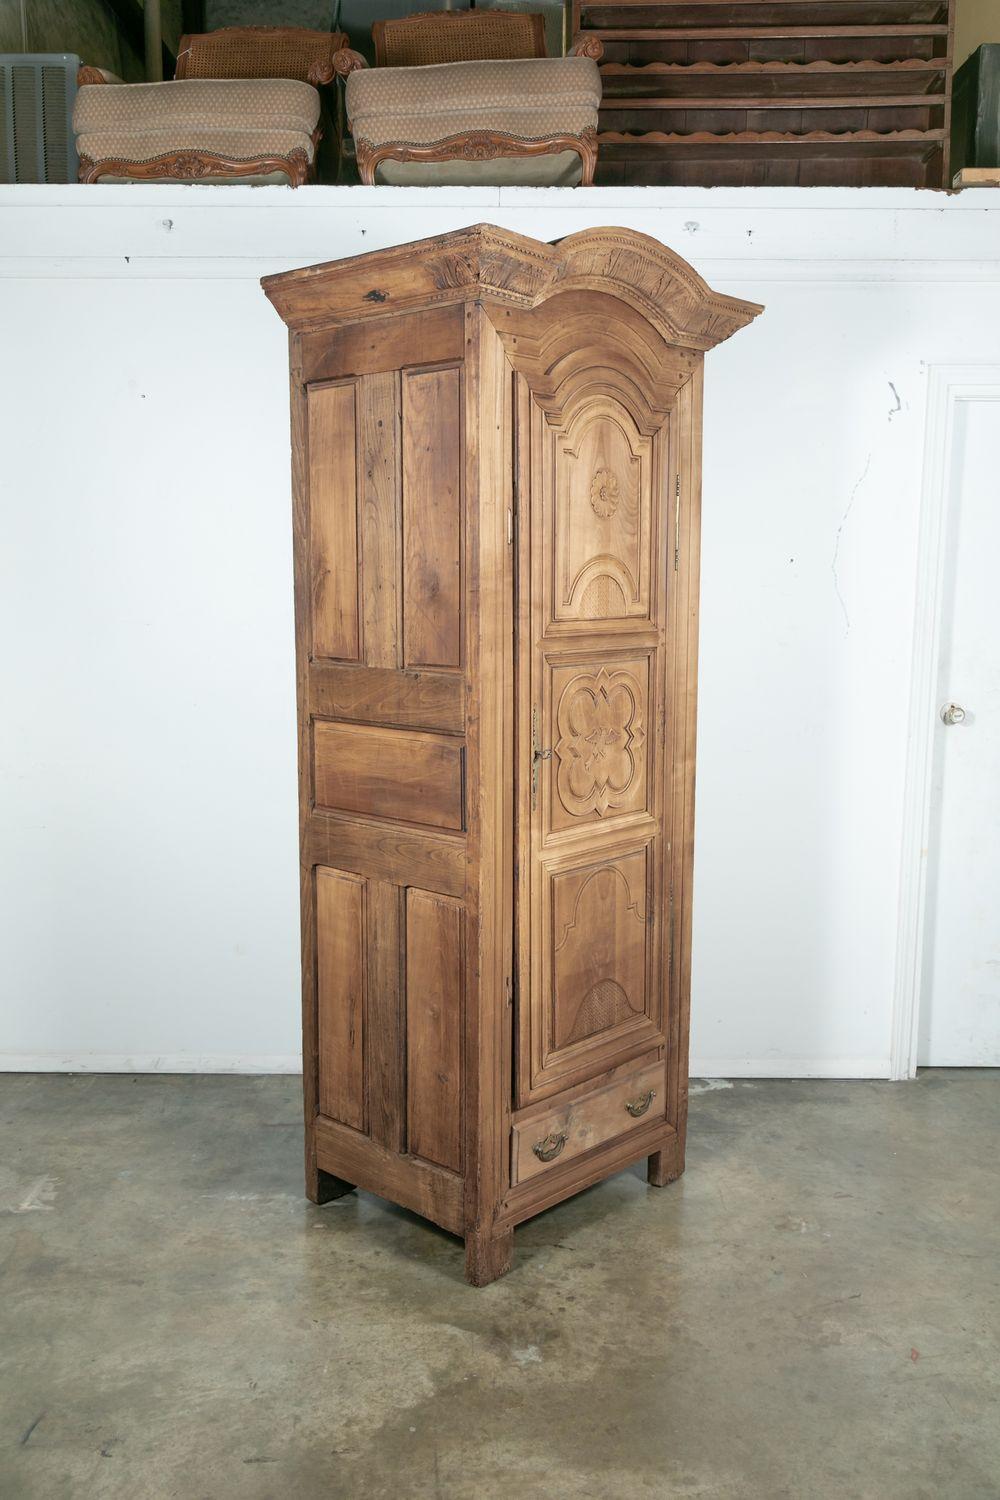 18th century French Louis XIV style bonnetiere (one door armoire) handcrafted in walnut by master artisans in the Normandy region, circa 1750s. The single door bleached armoire, having a chapeau de gendarme cornice, sits on block feet and features a